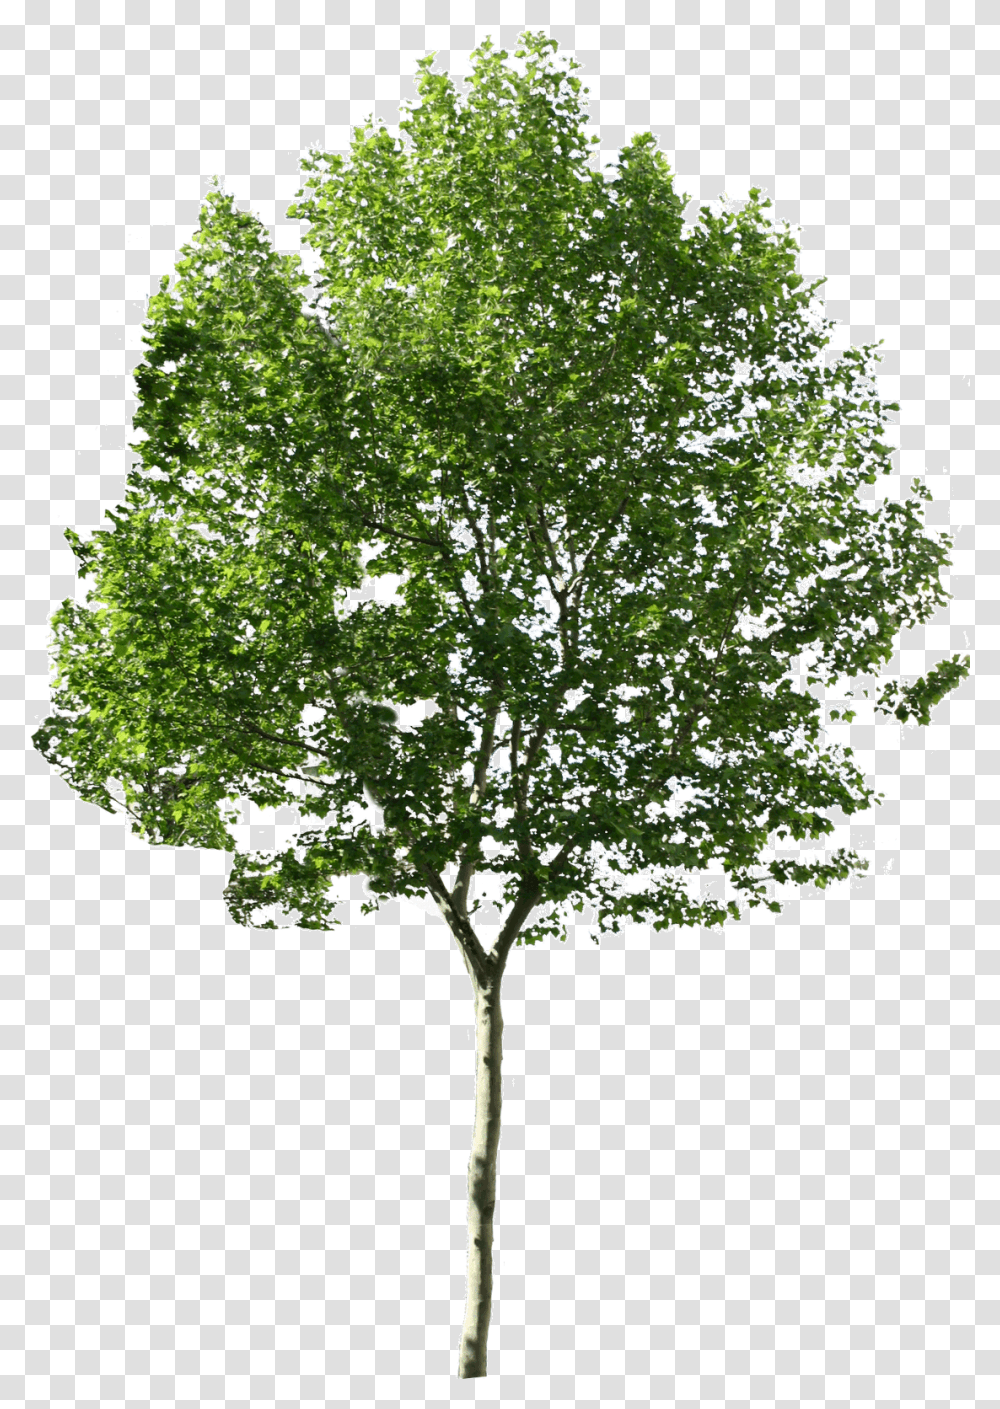 Tree Images Quality Trees For Photoshop, Plant, Maple, Leaf, Tree Trunk Transparent Png